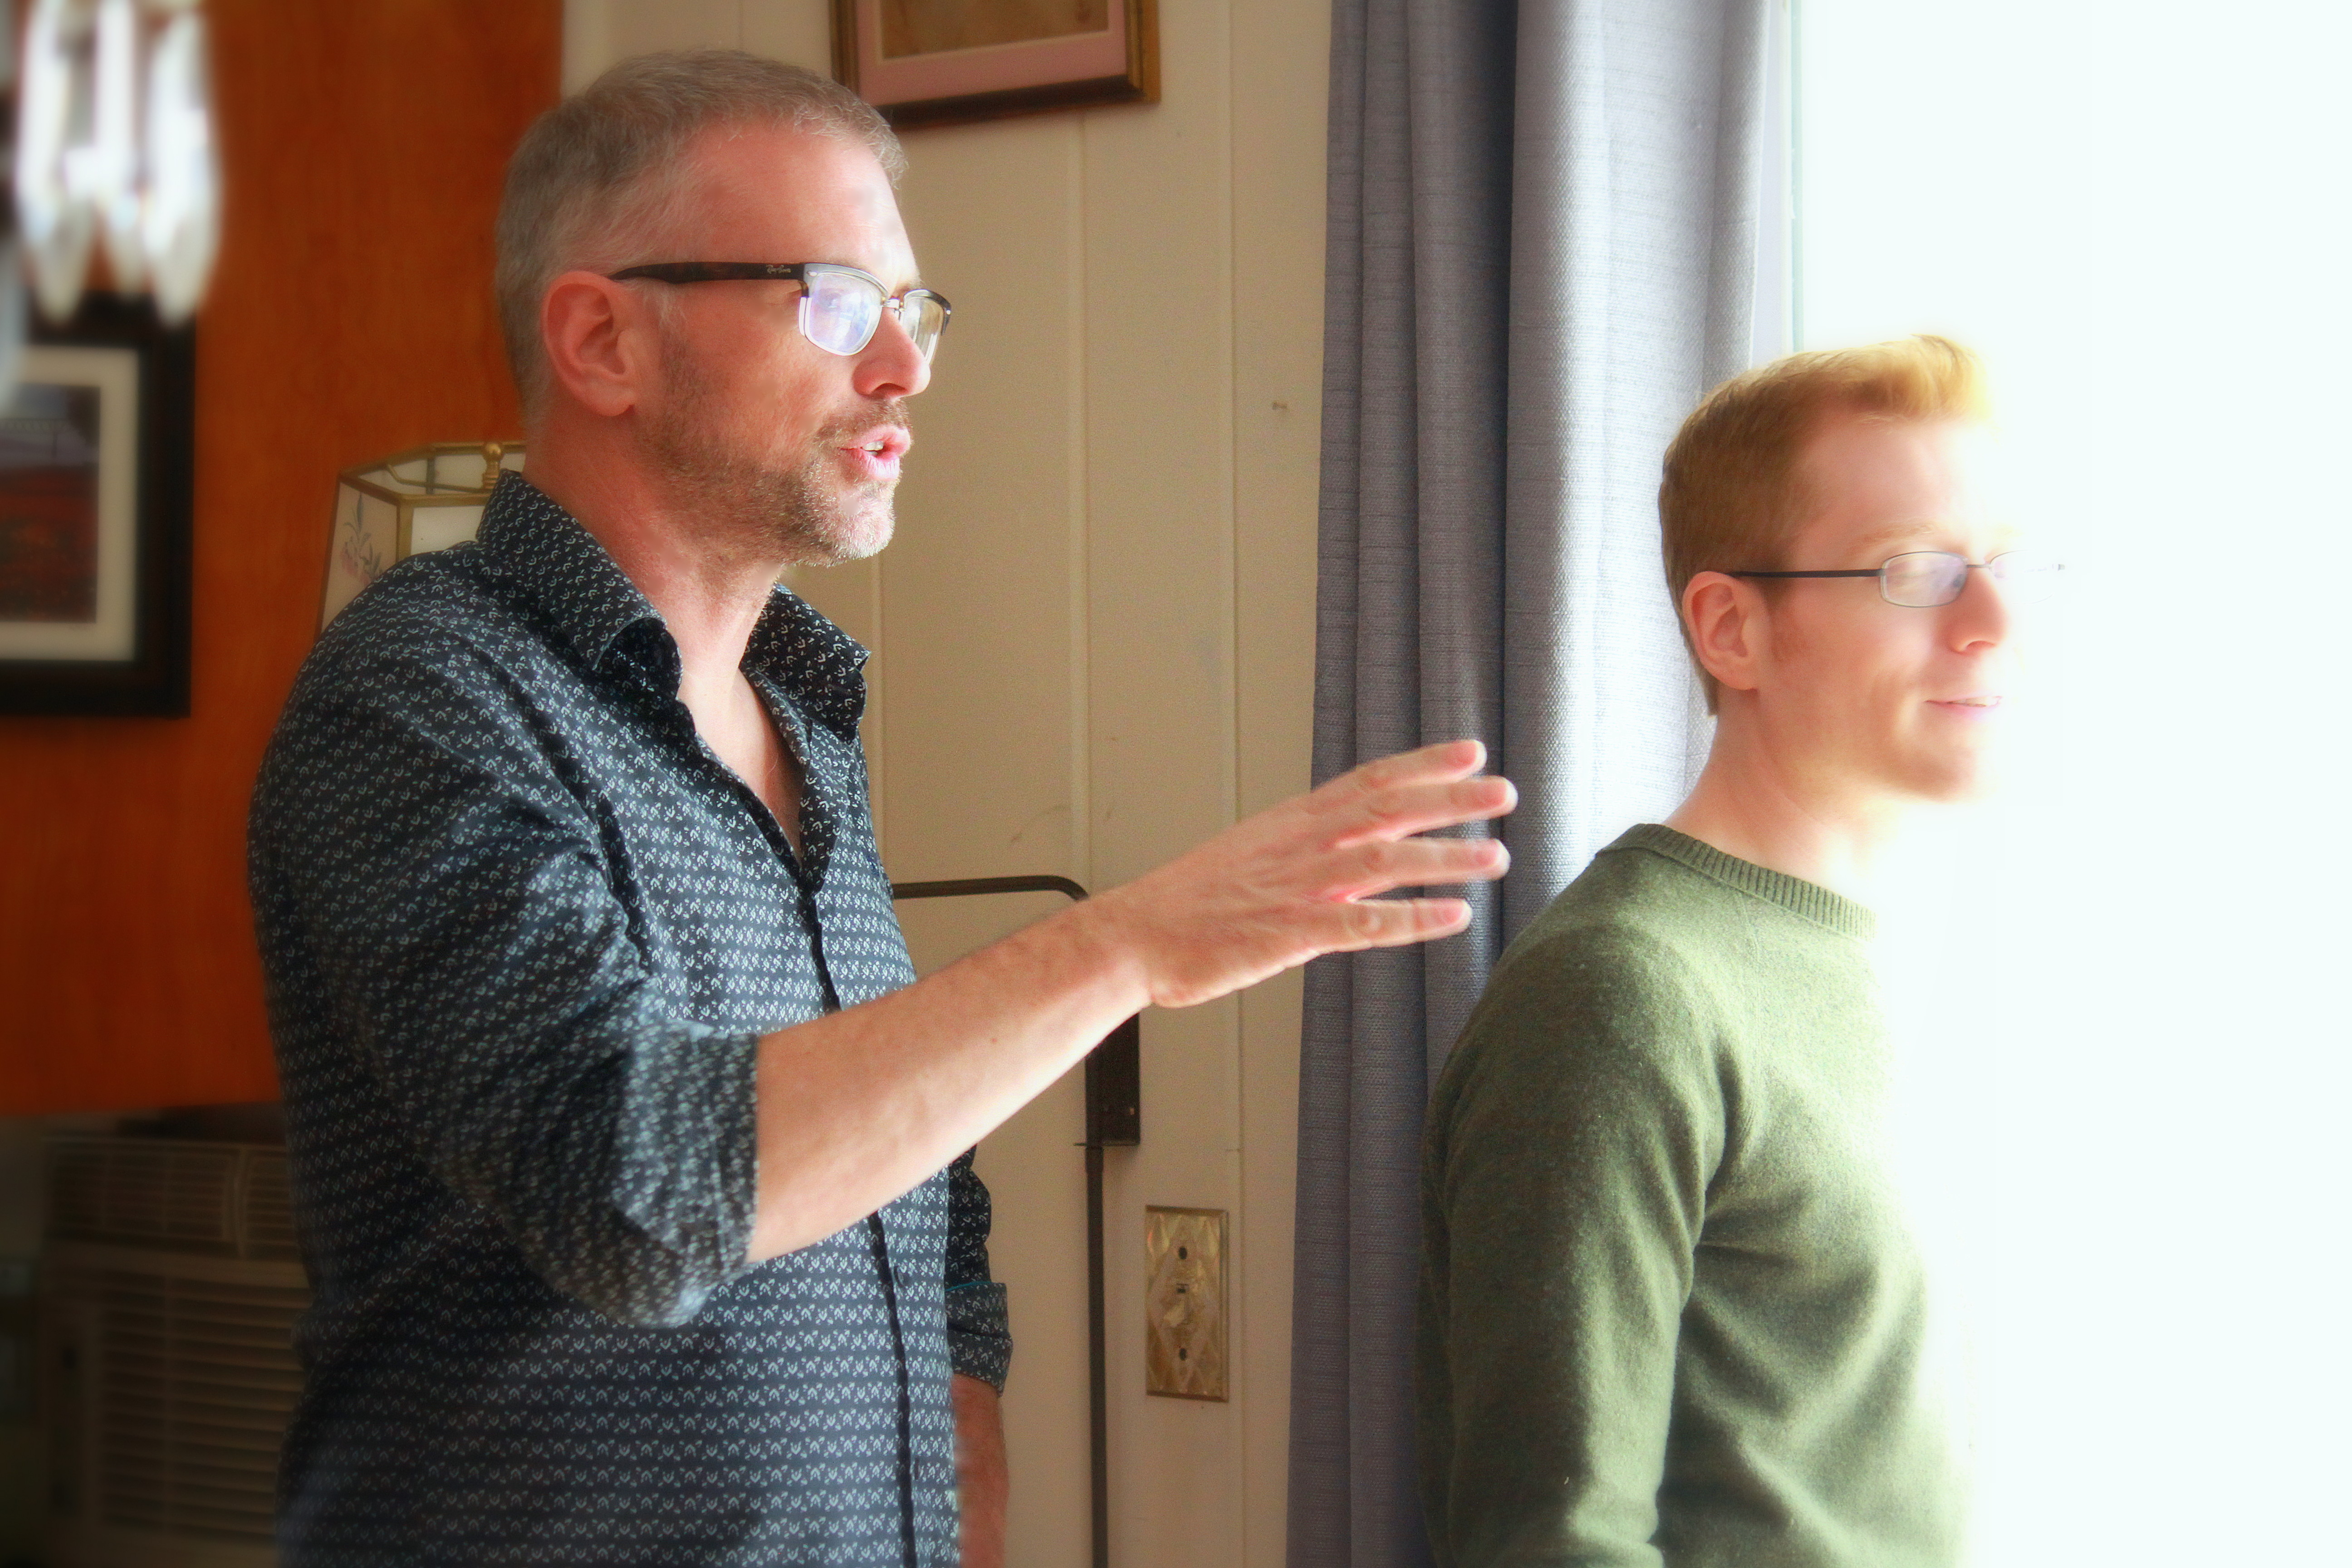 Writer/director John G. Young directs actor Anthony Rapp (as Brad) in his new film 